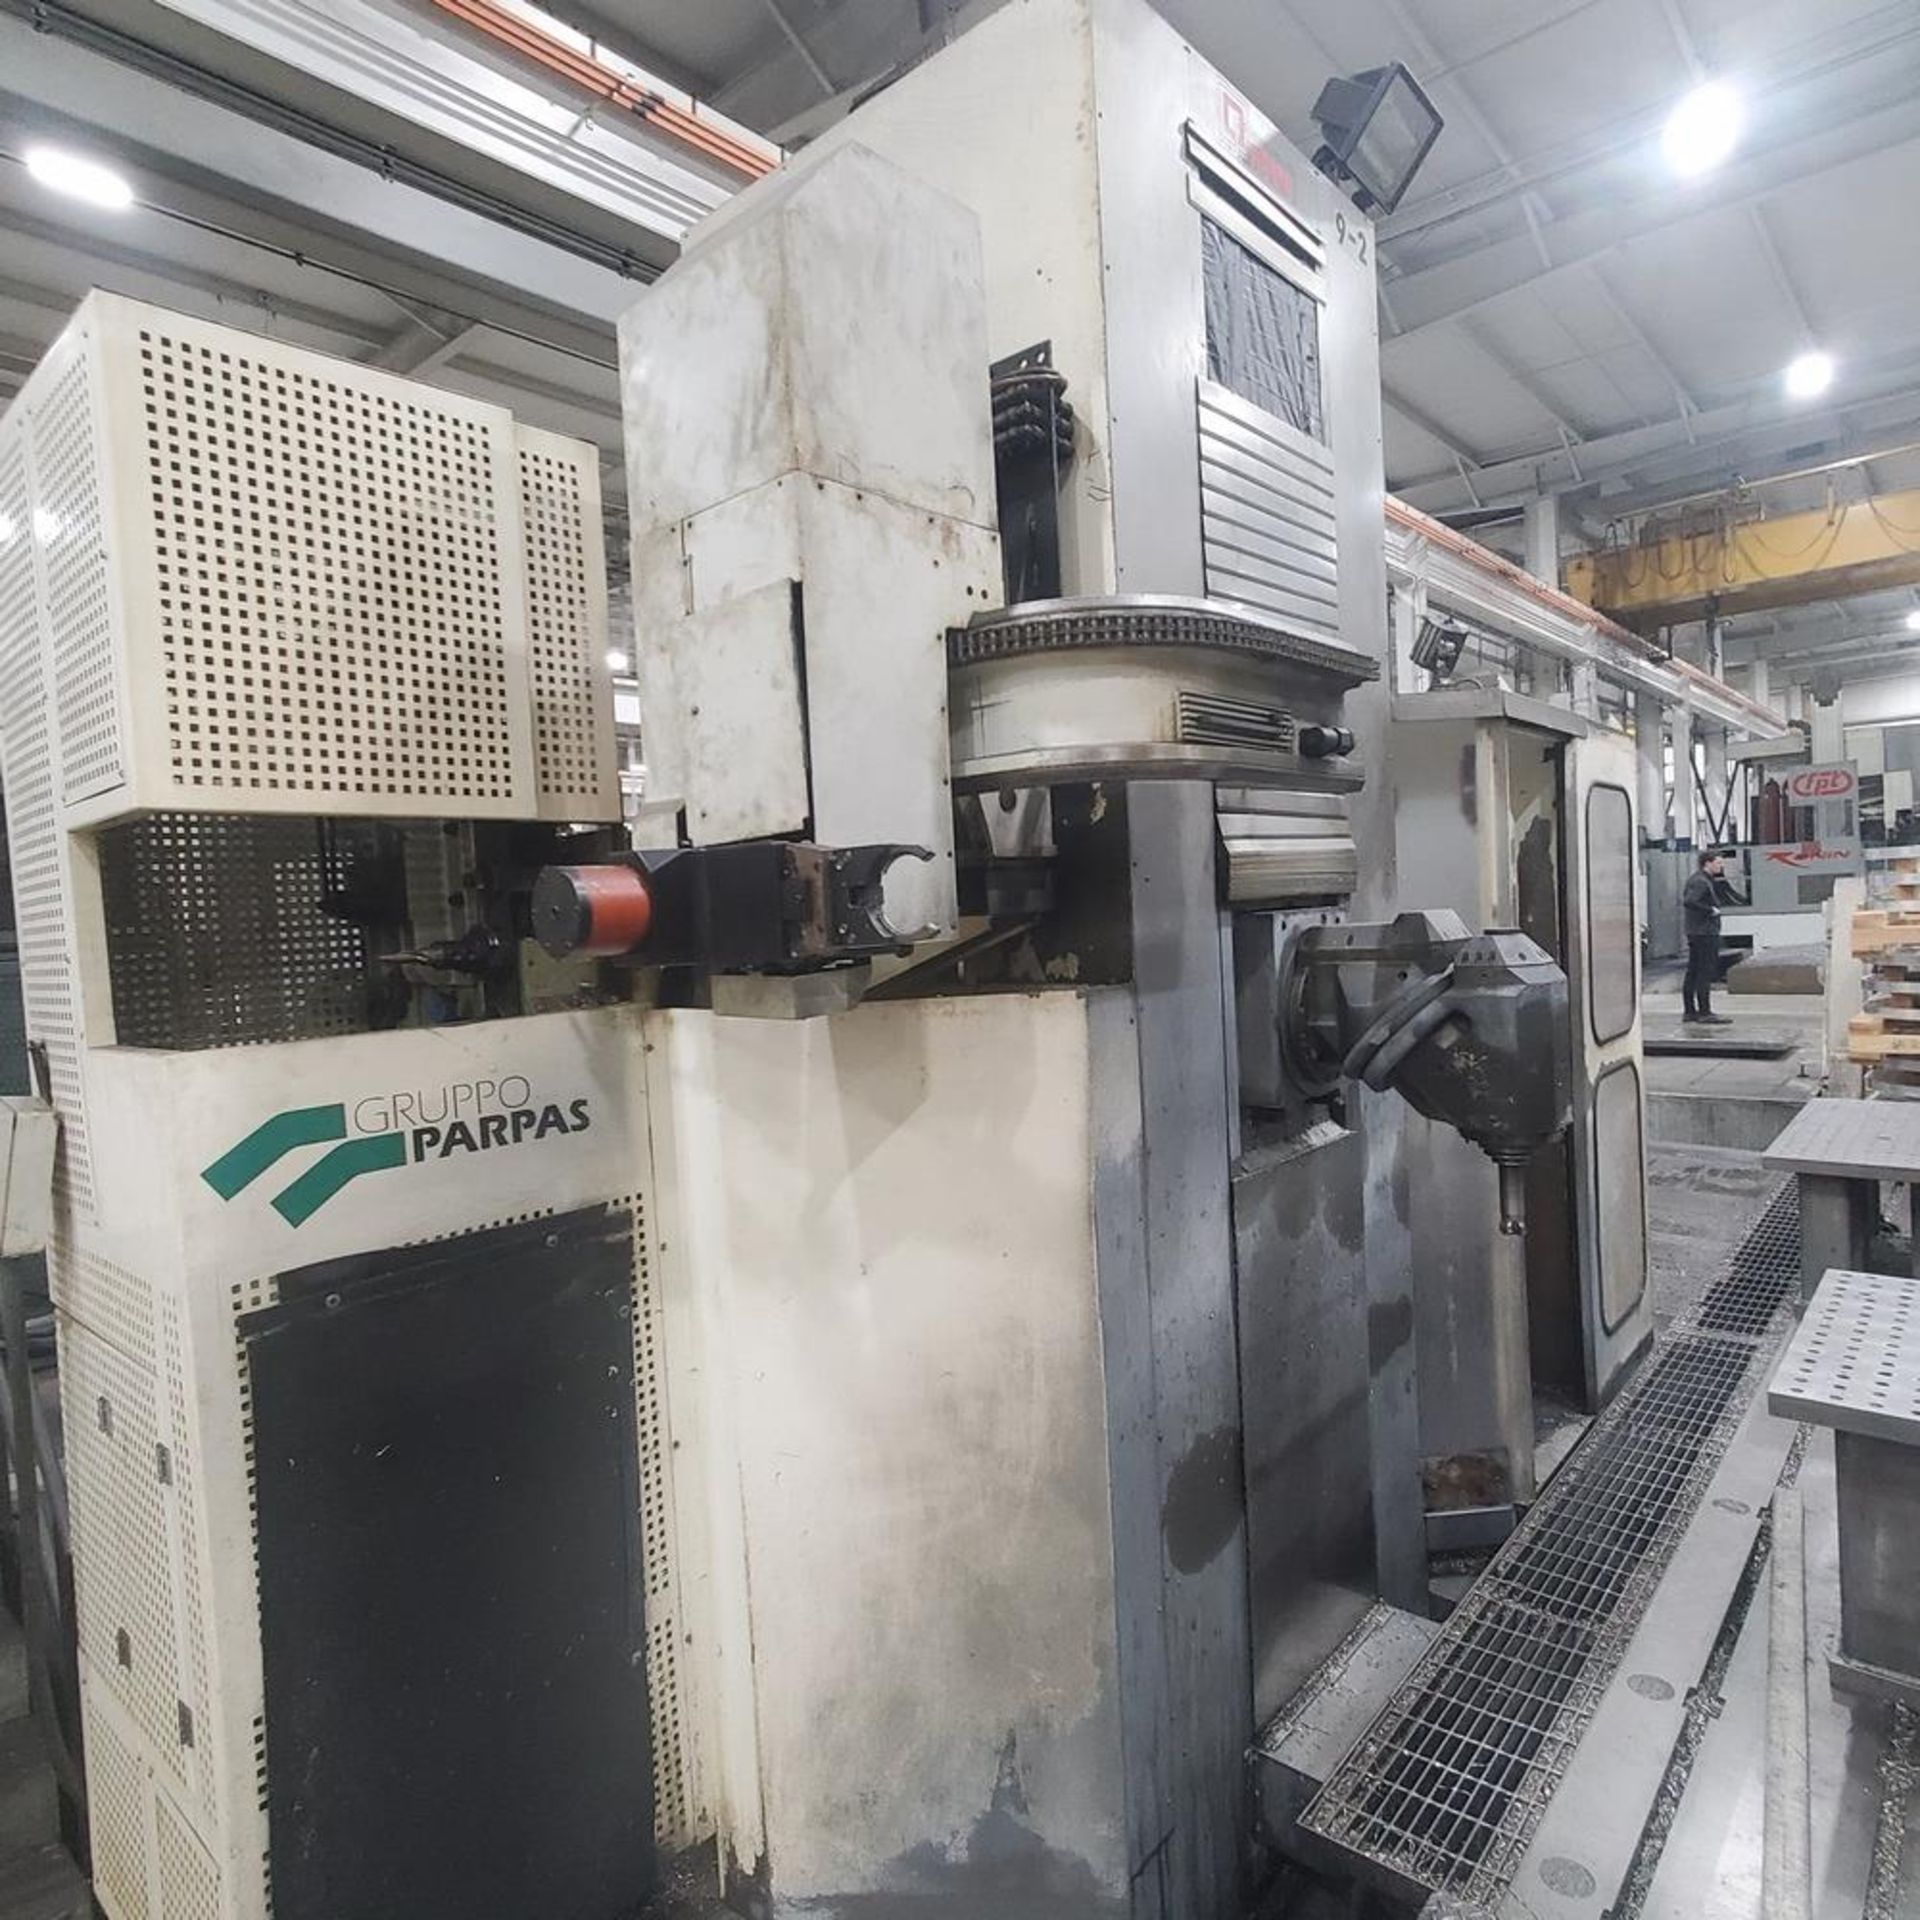 Parpas OMV Brave Multi Axis Machining Center, 236" X 81" X 47 " Travels, 120,000 LBS Table Load - Image 5 of 12